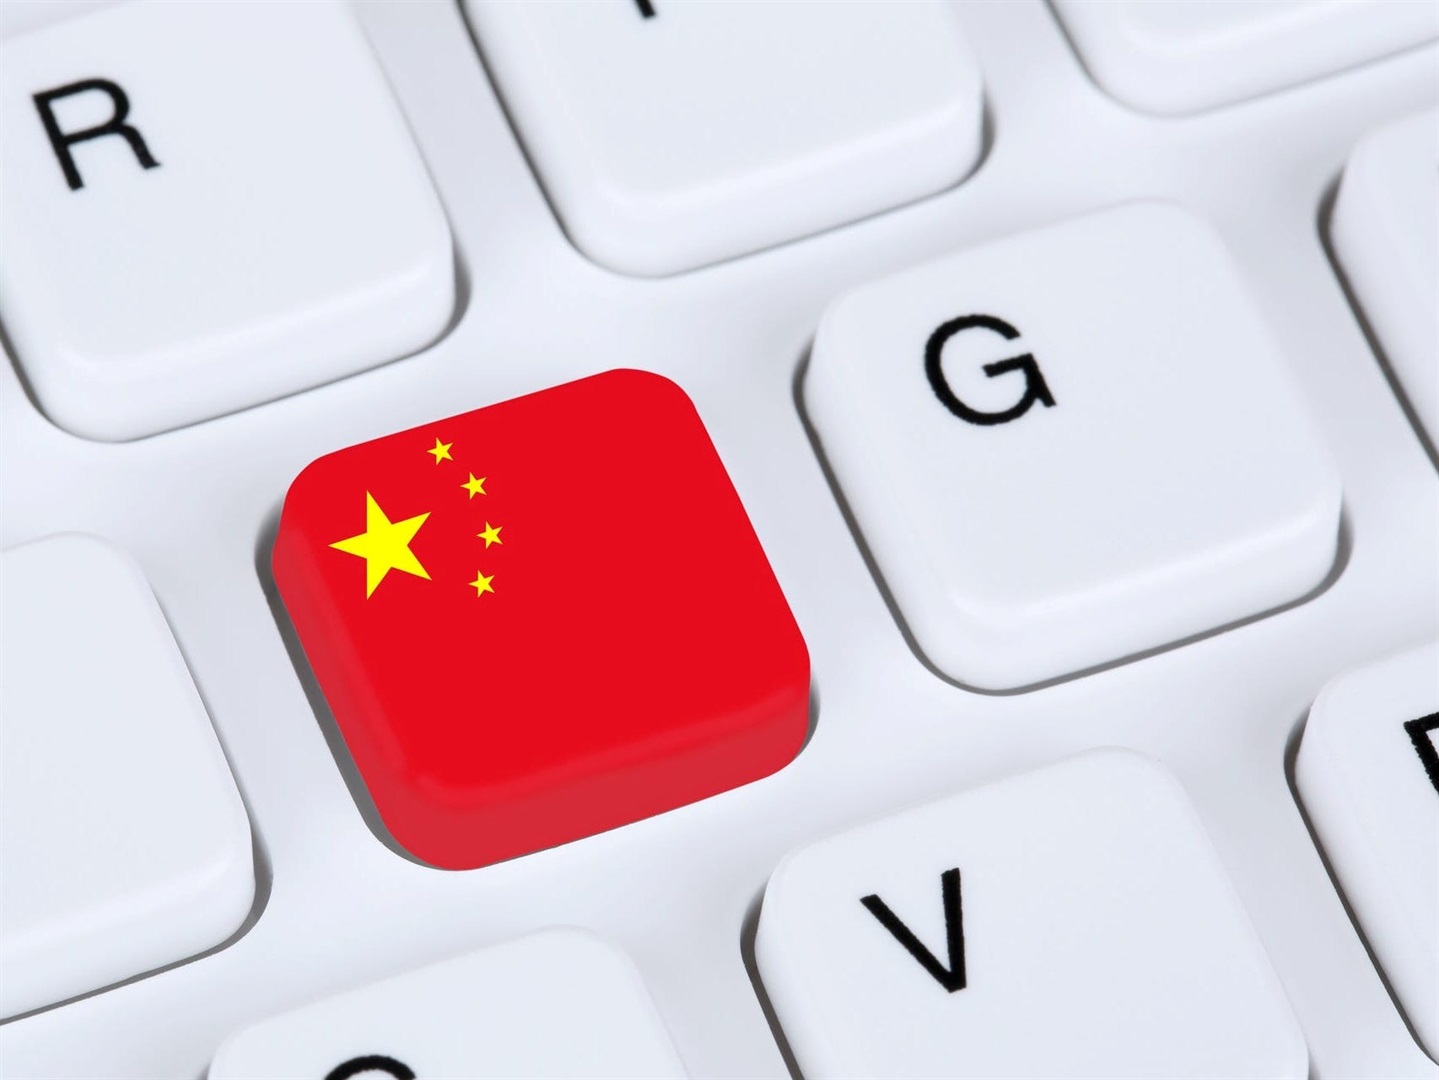 China plans to have every single comment reviewed before it's published on social media